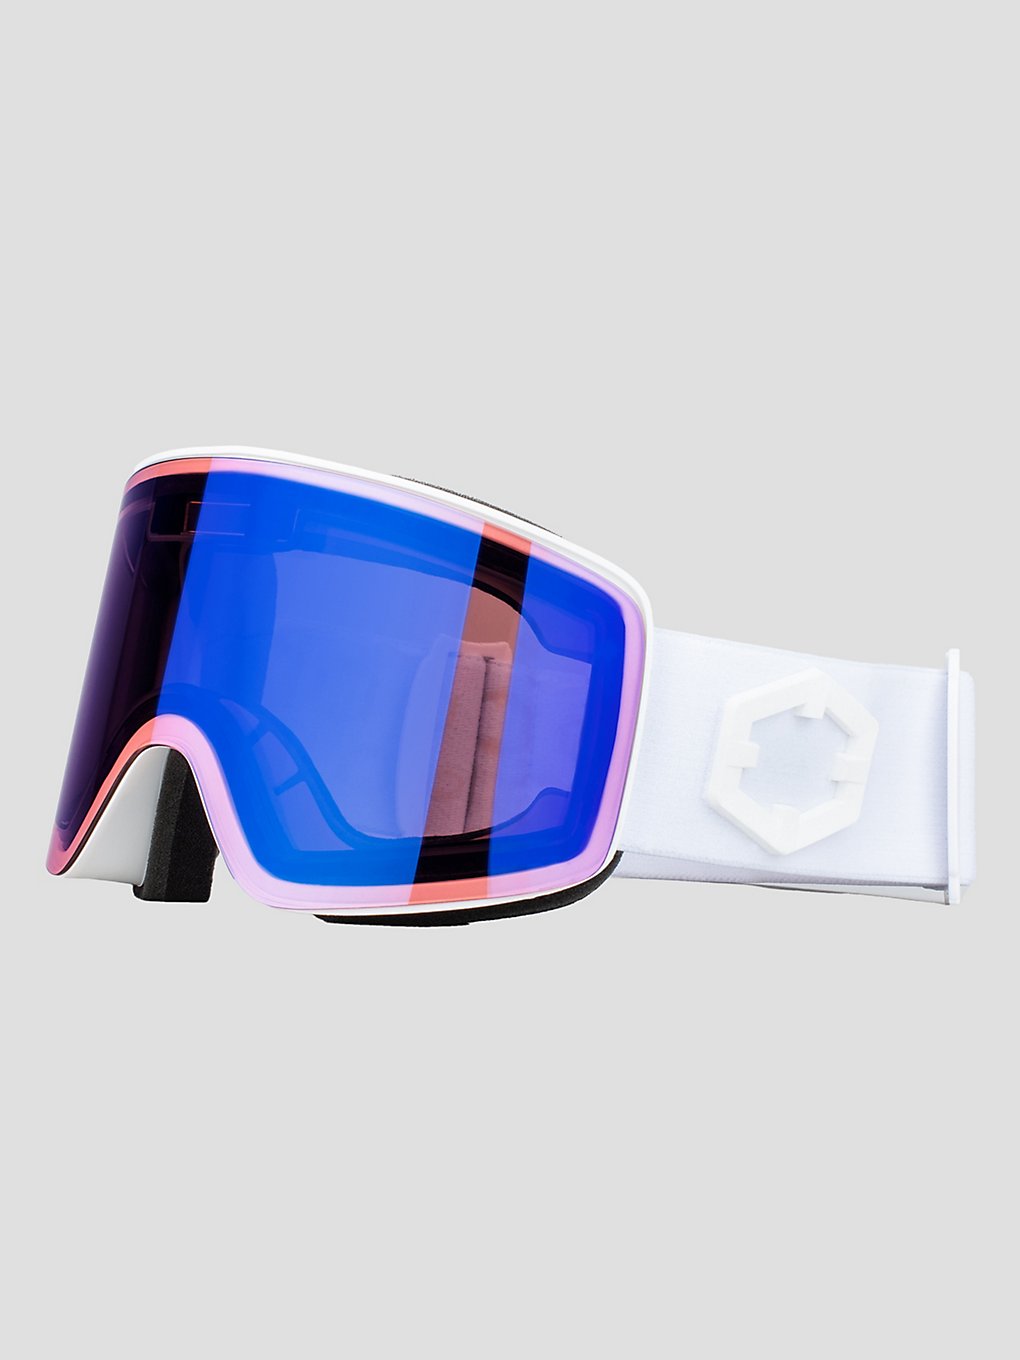 Out Of Electra 2 White Goggle irid blue kaufen